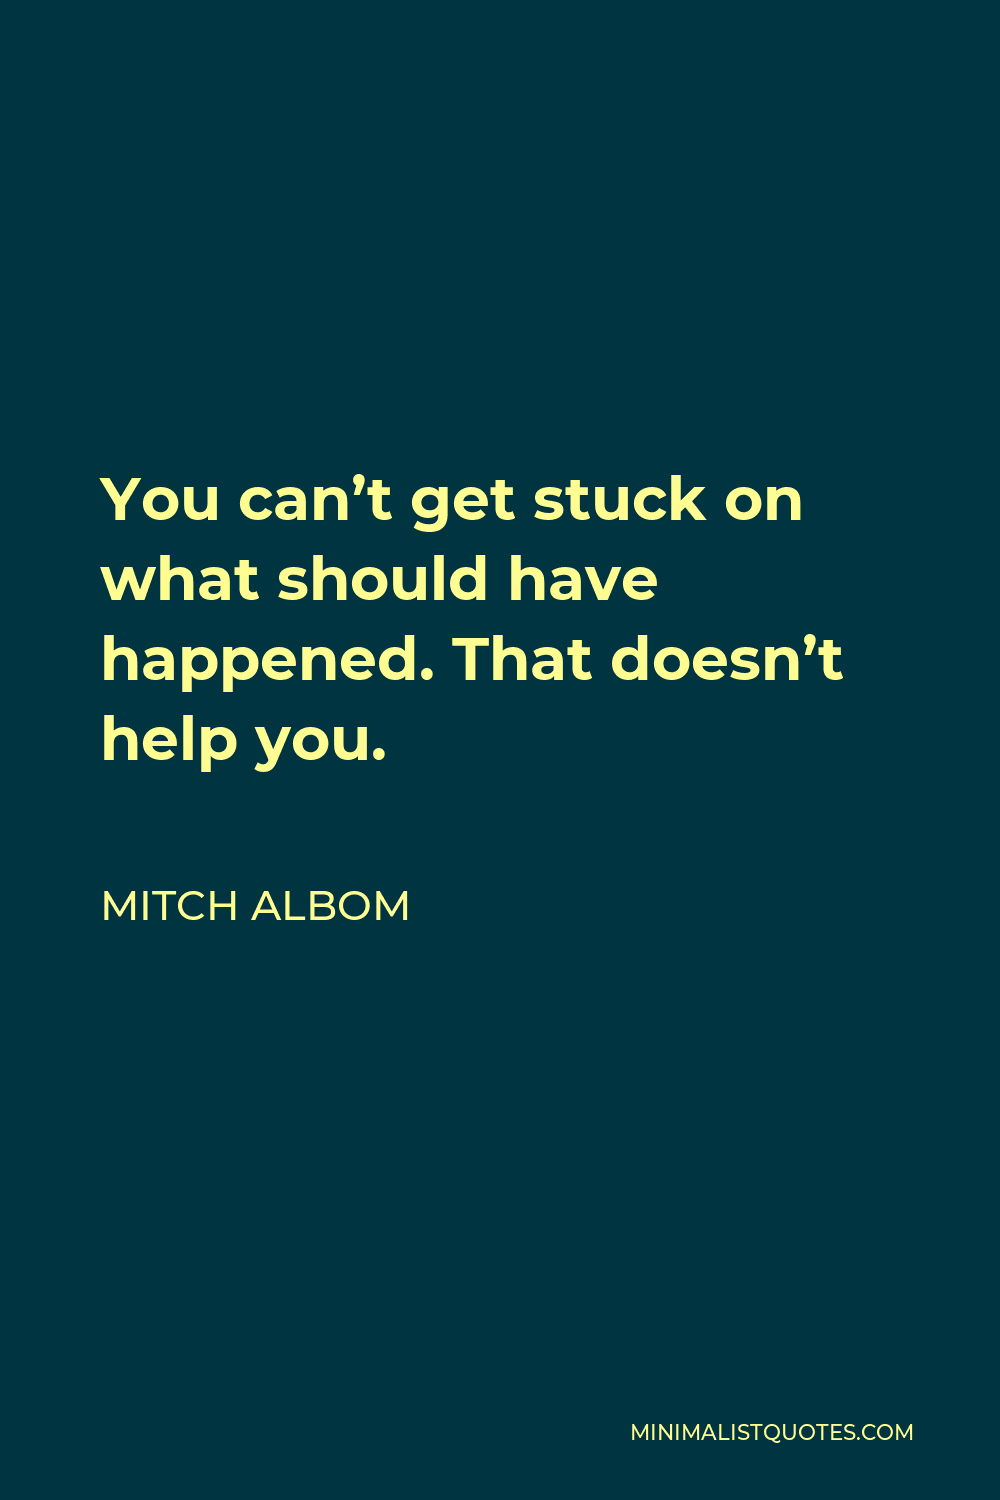 Mitch Albom Quote - You can’t get stuck on what should have happened. That doesn’t help you.